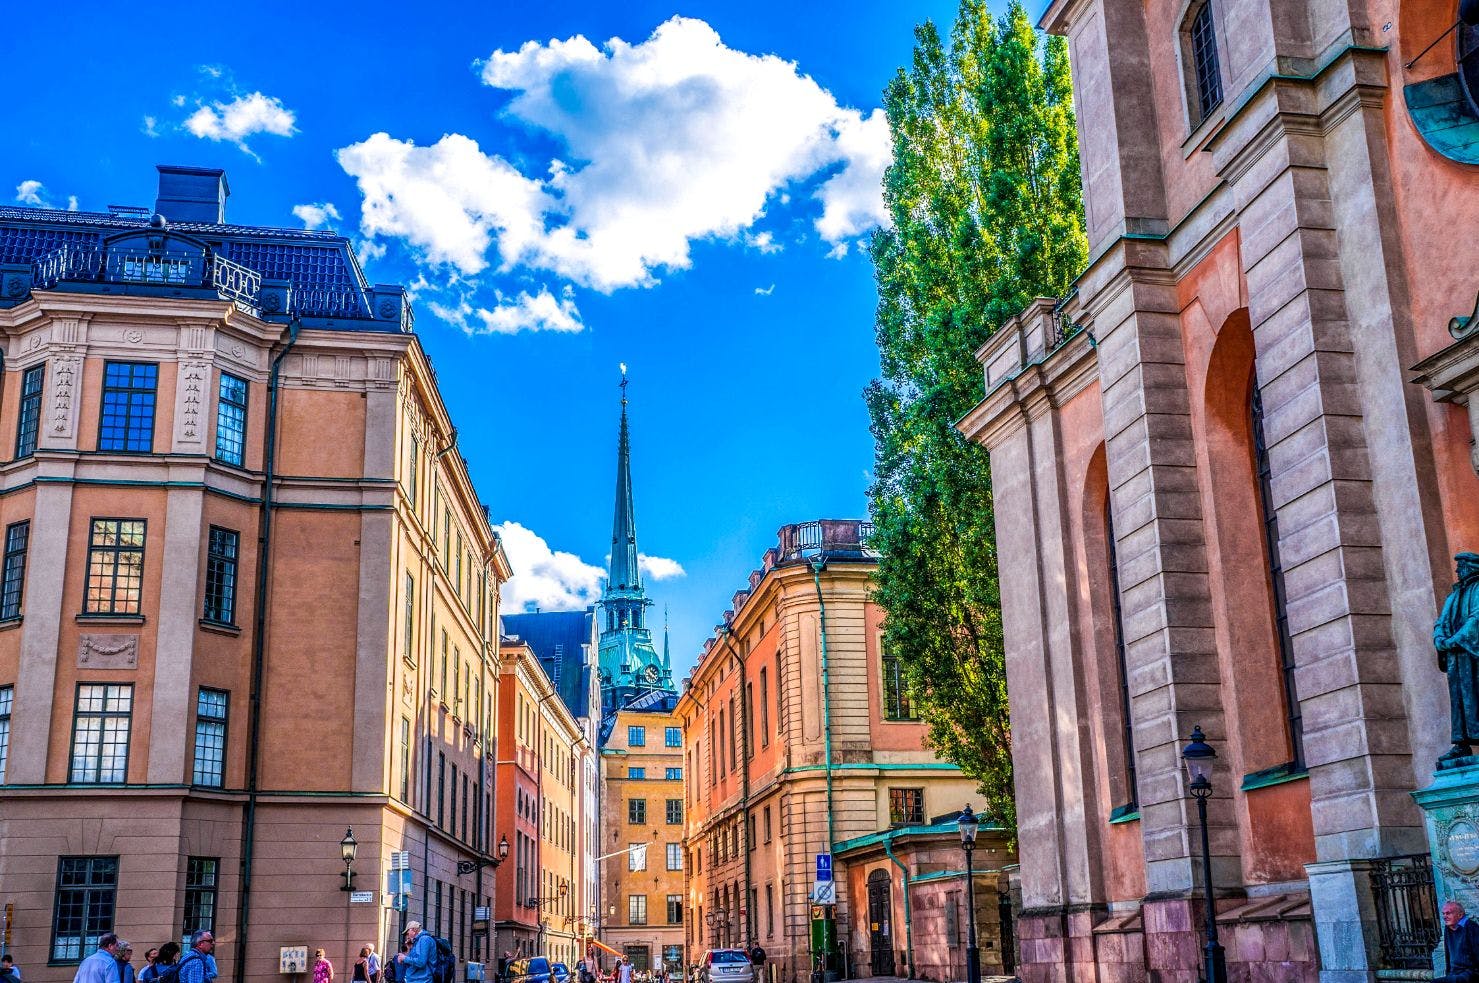 Explore Stockholm's art and culture with a local